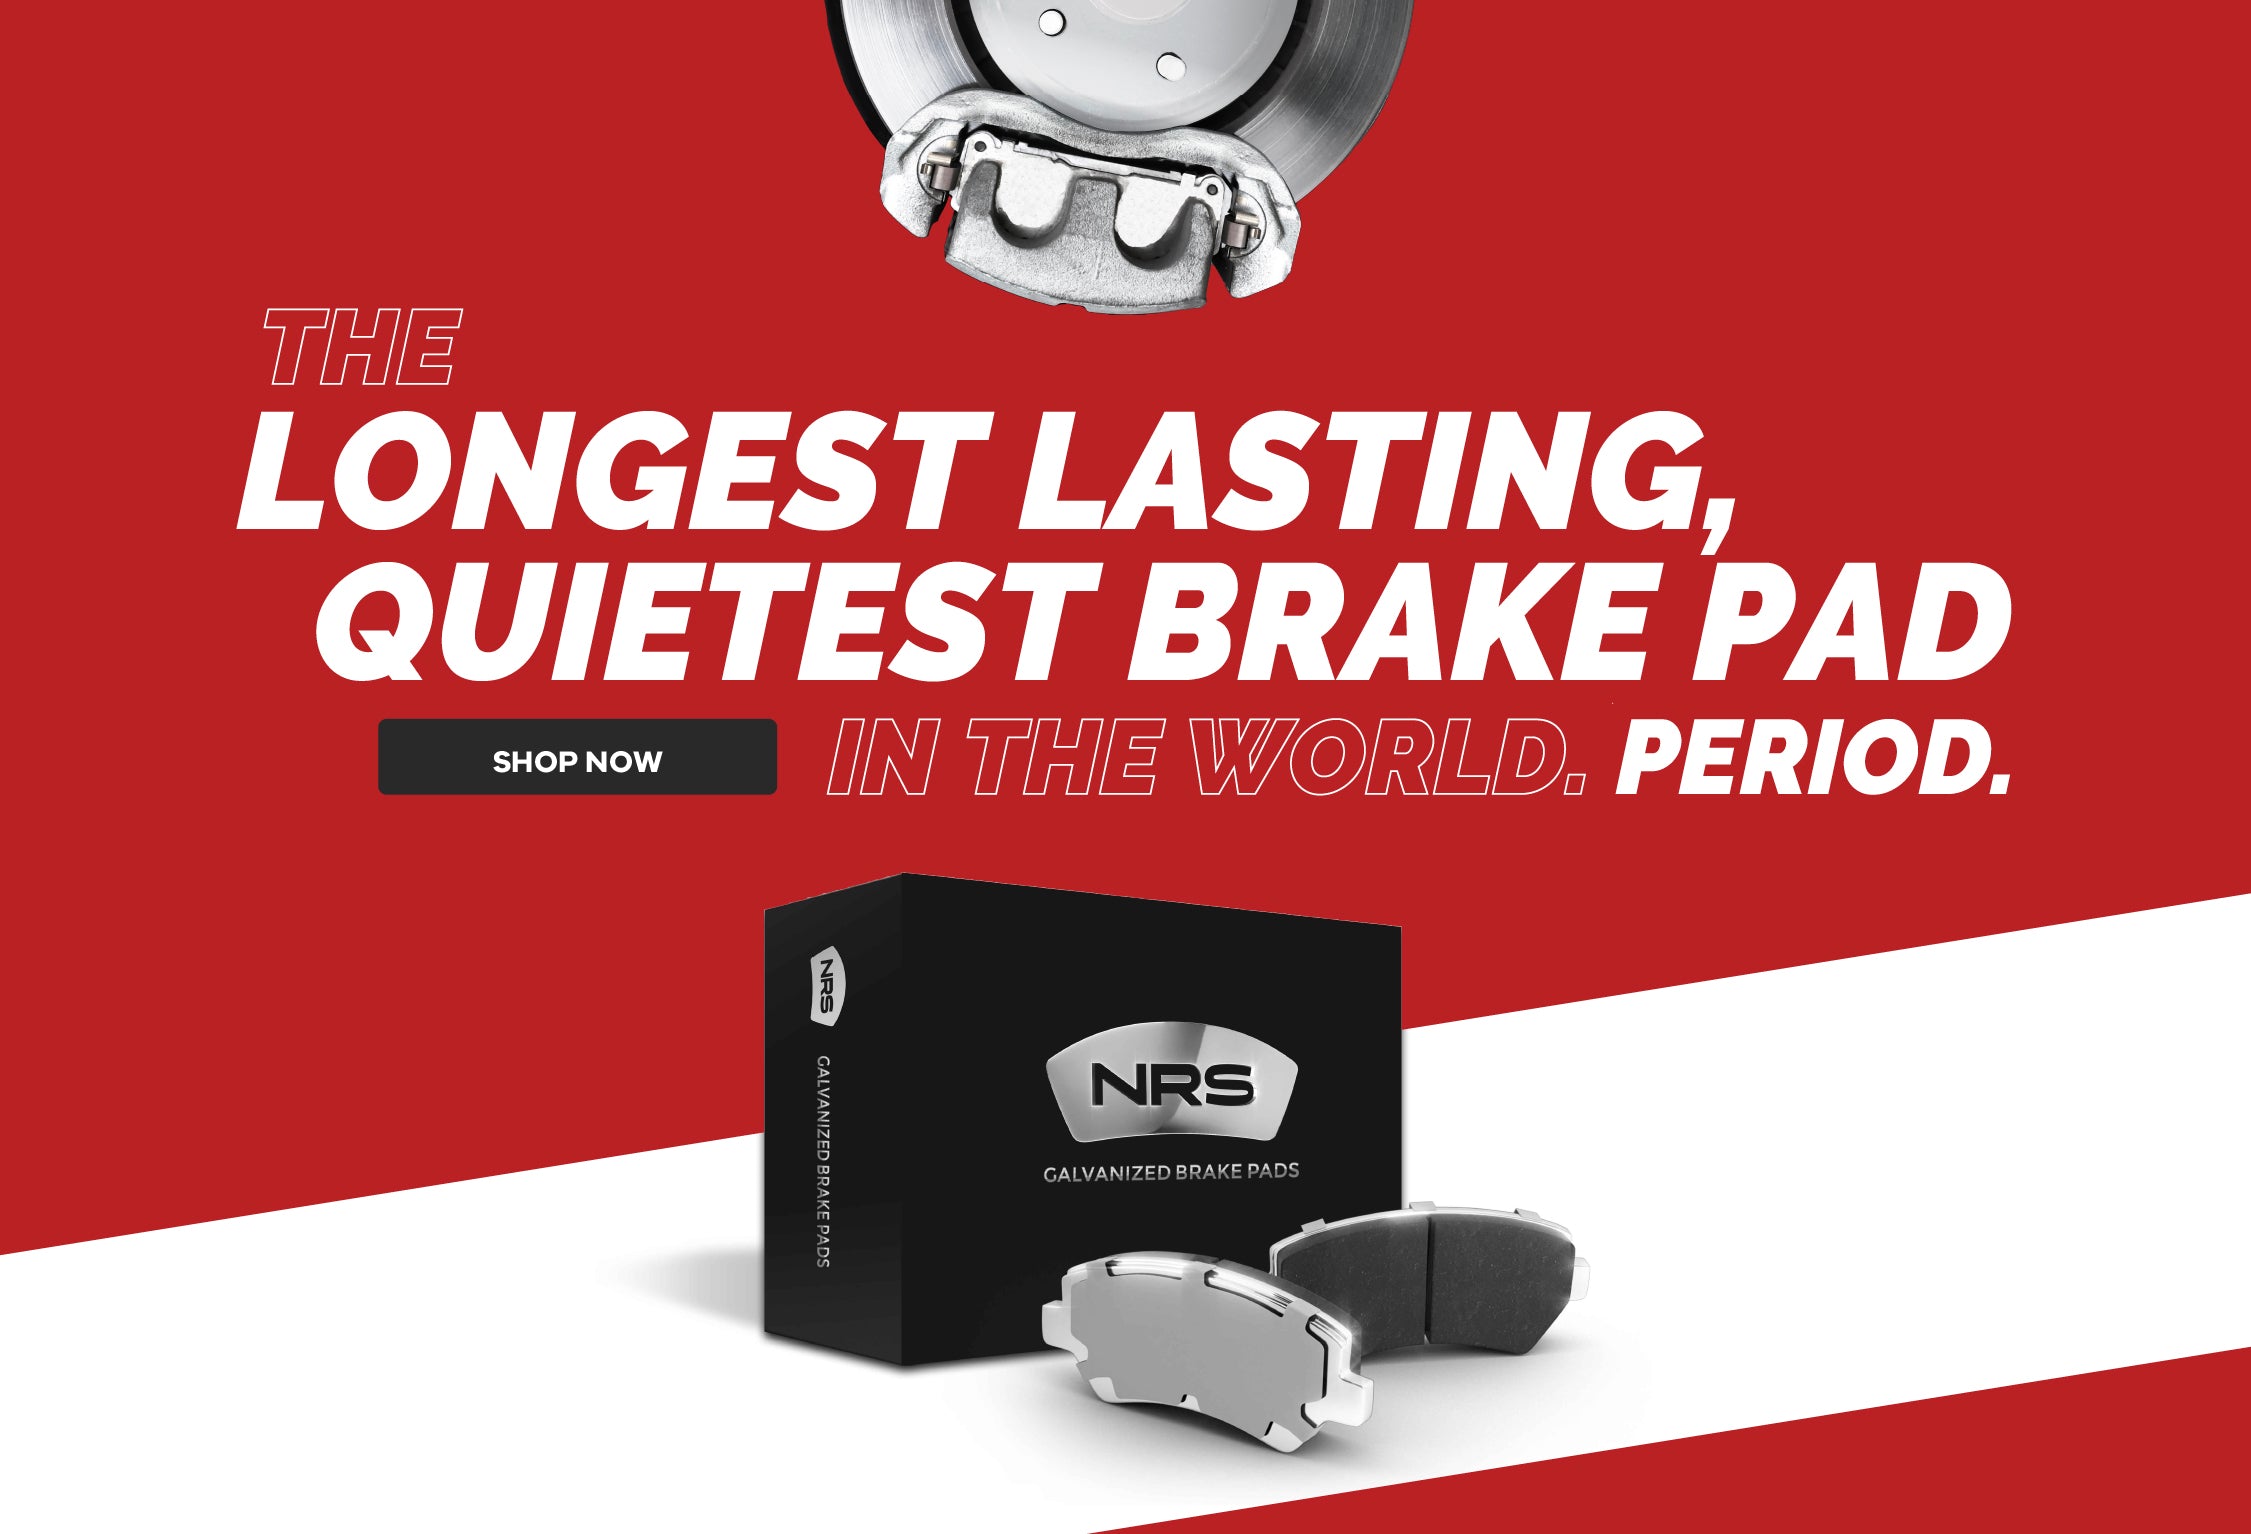 New Brake Pads For Sedans Crossovers and SUVs